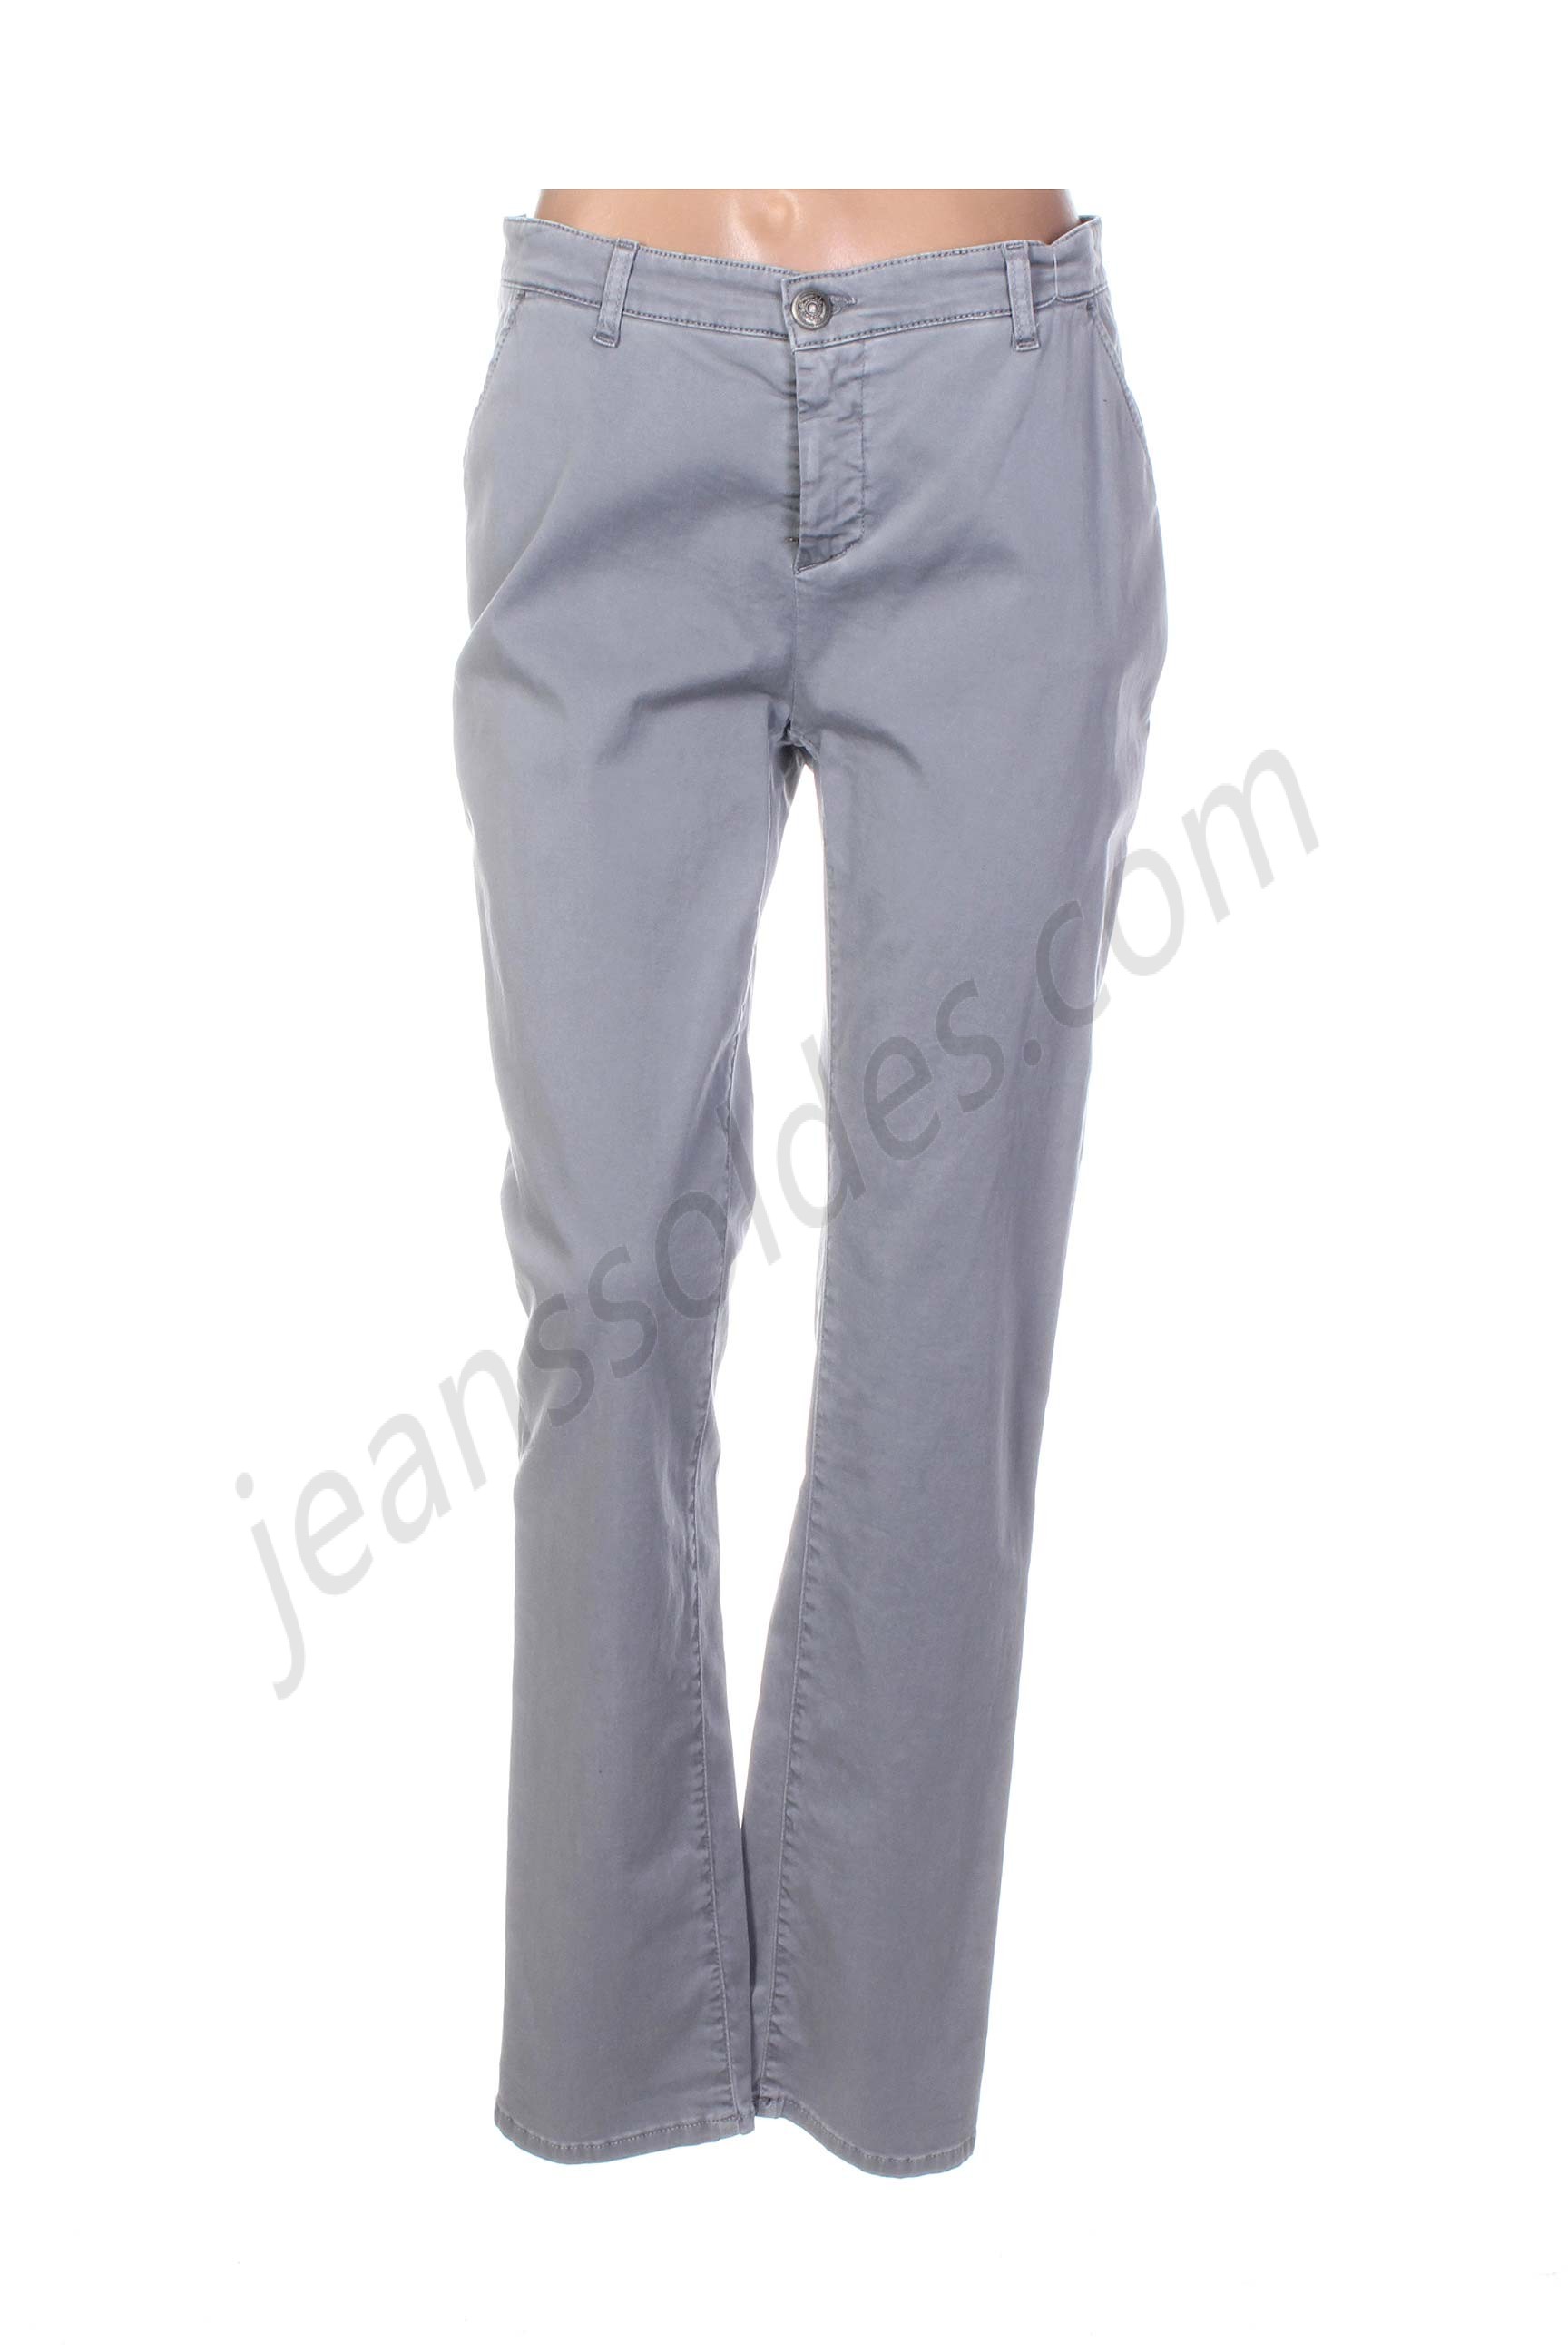 weinberg-Jeans coupe droite prix d’amis - weinberg-Jeans coupe droite prix d’amis